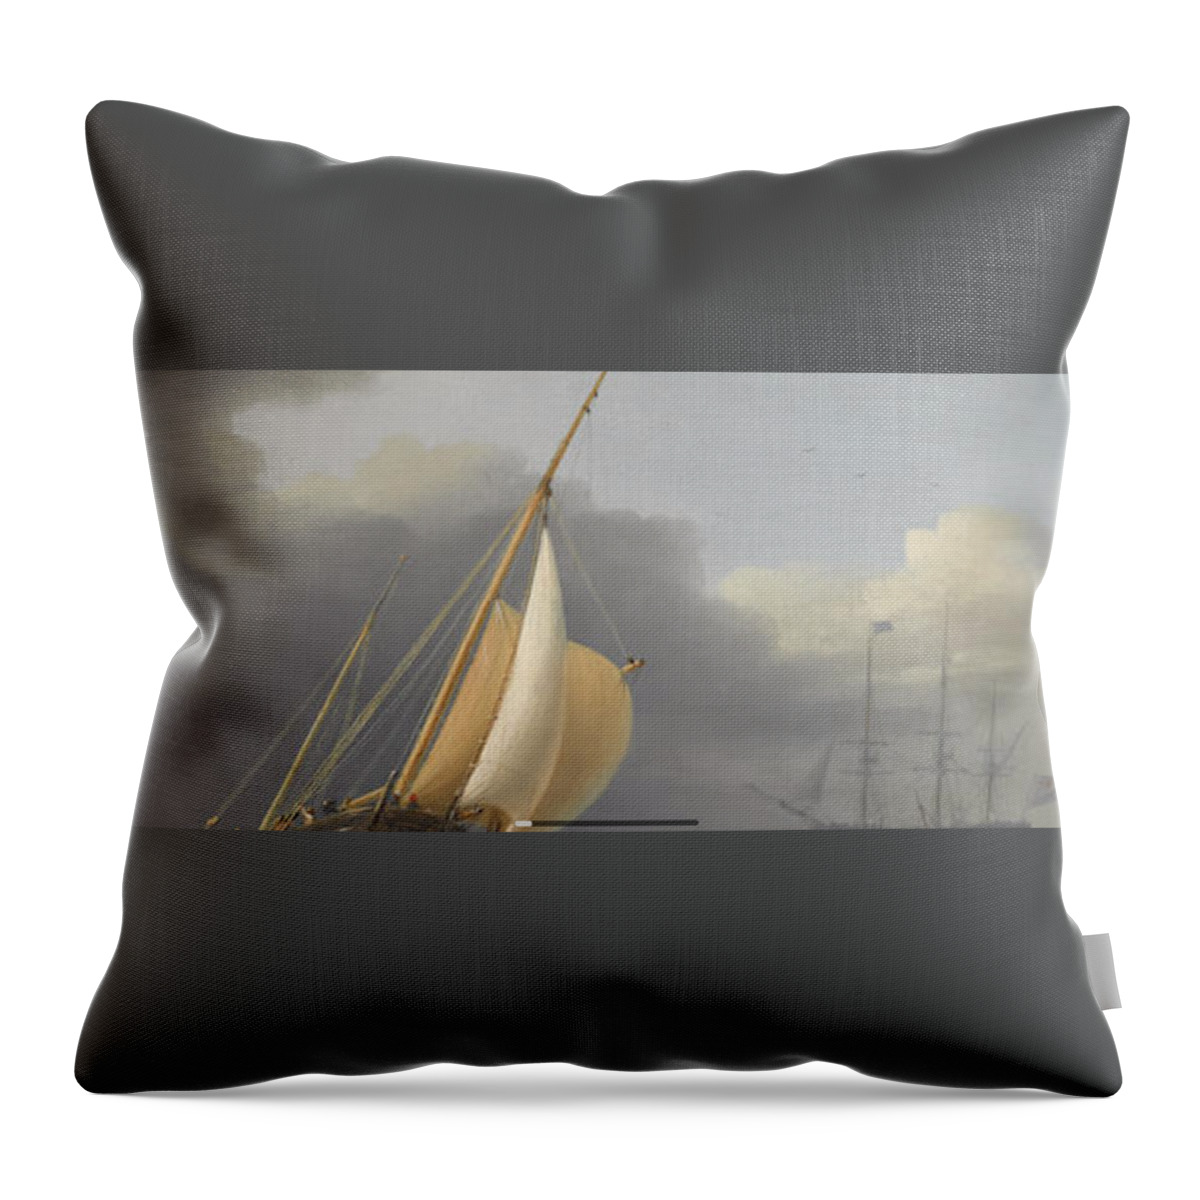 Dominic Serres (british 1722-1793) Coastal Shipping In Rough Seas Throw Pillow featuring the painting Coastal shipping in rough seas by MotionAge Designs